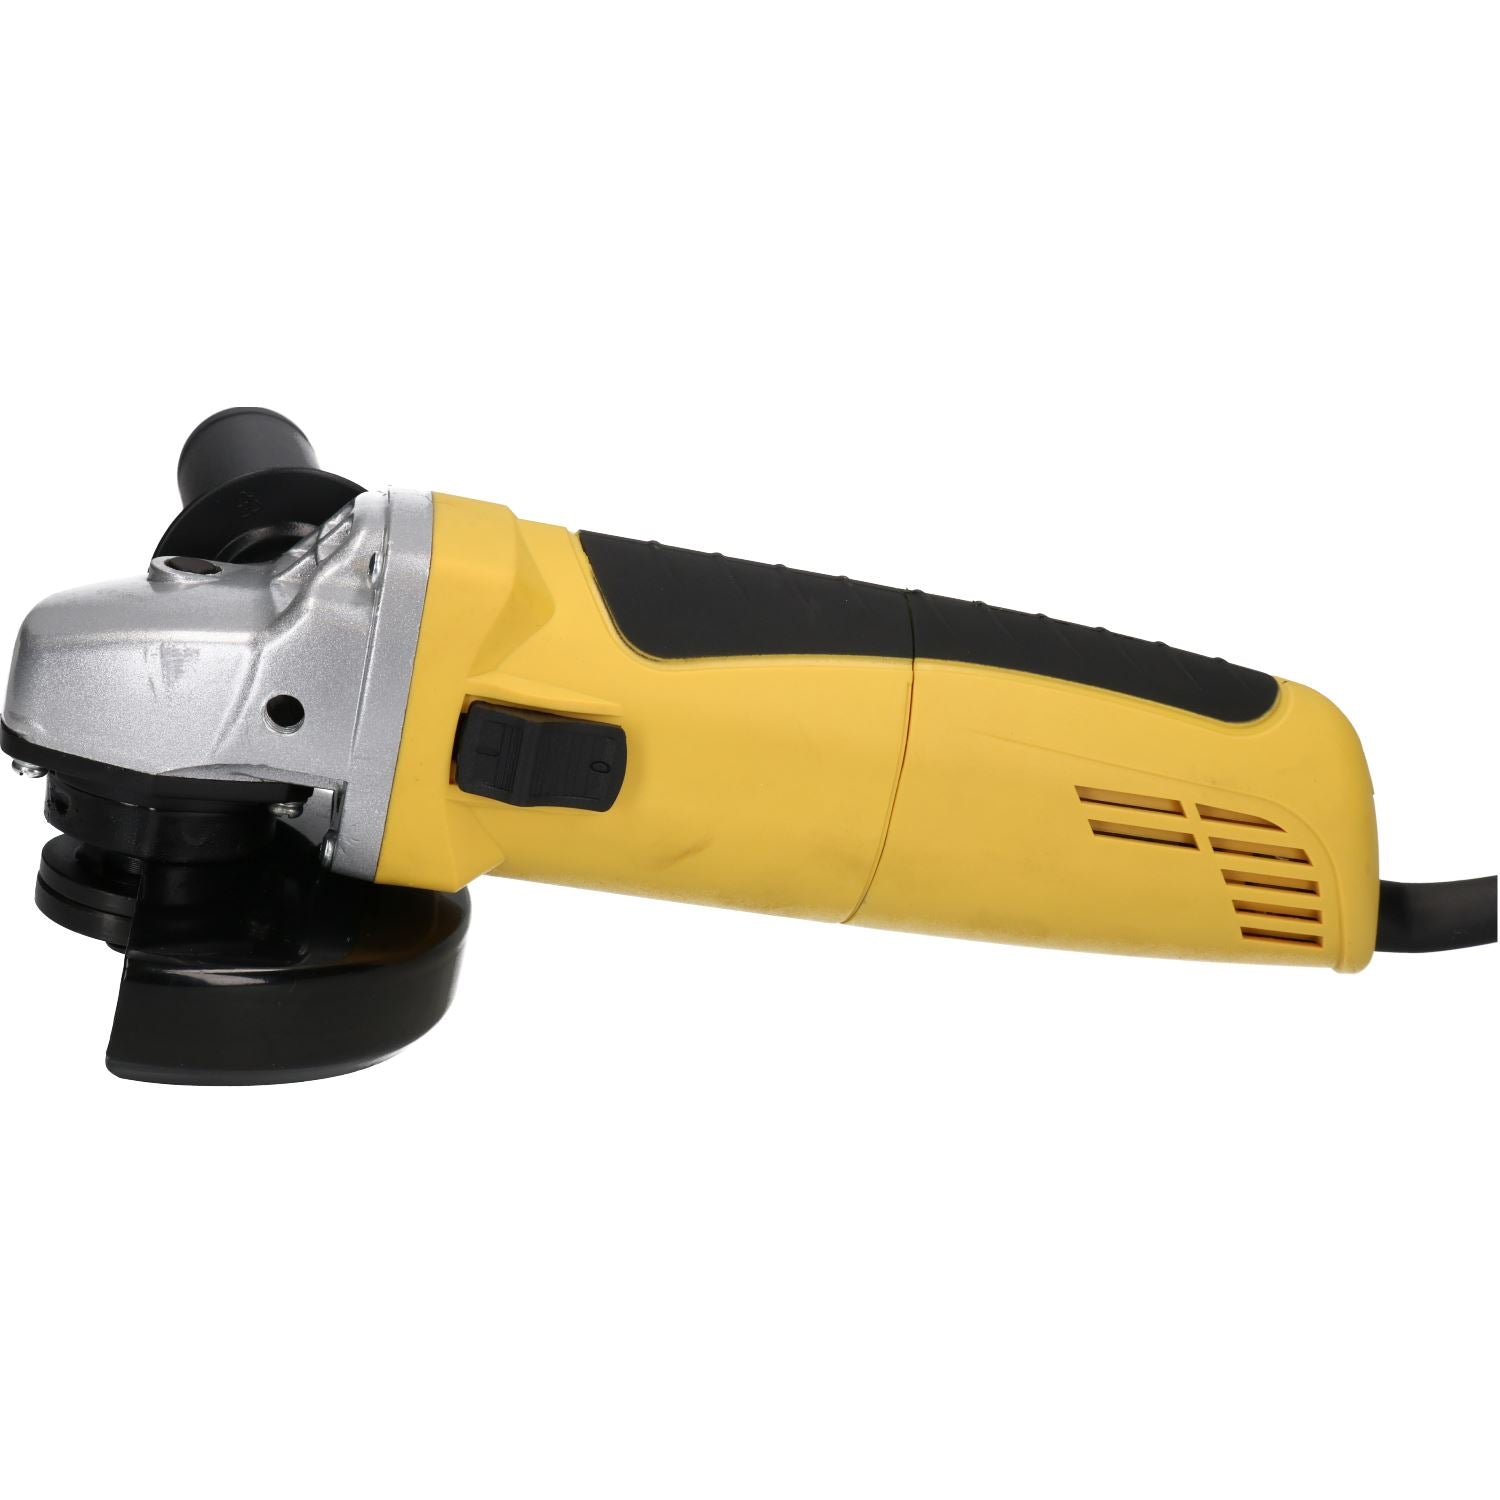 115mm / 4-1/2" Angle Grinder Cutting Sanding Tool 900W 240V AN142